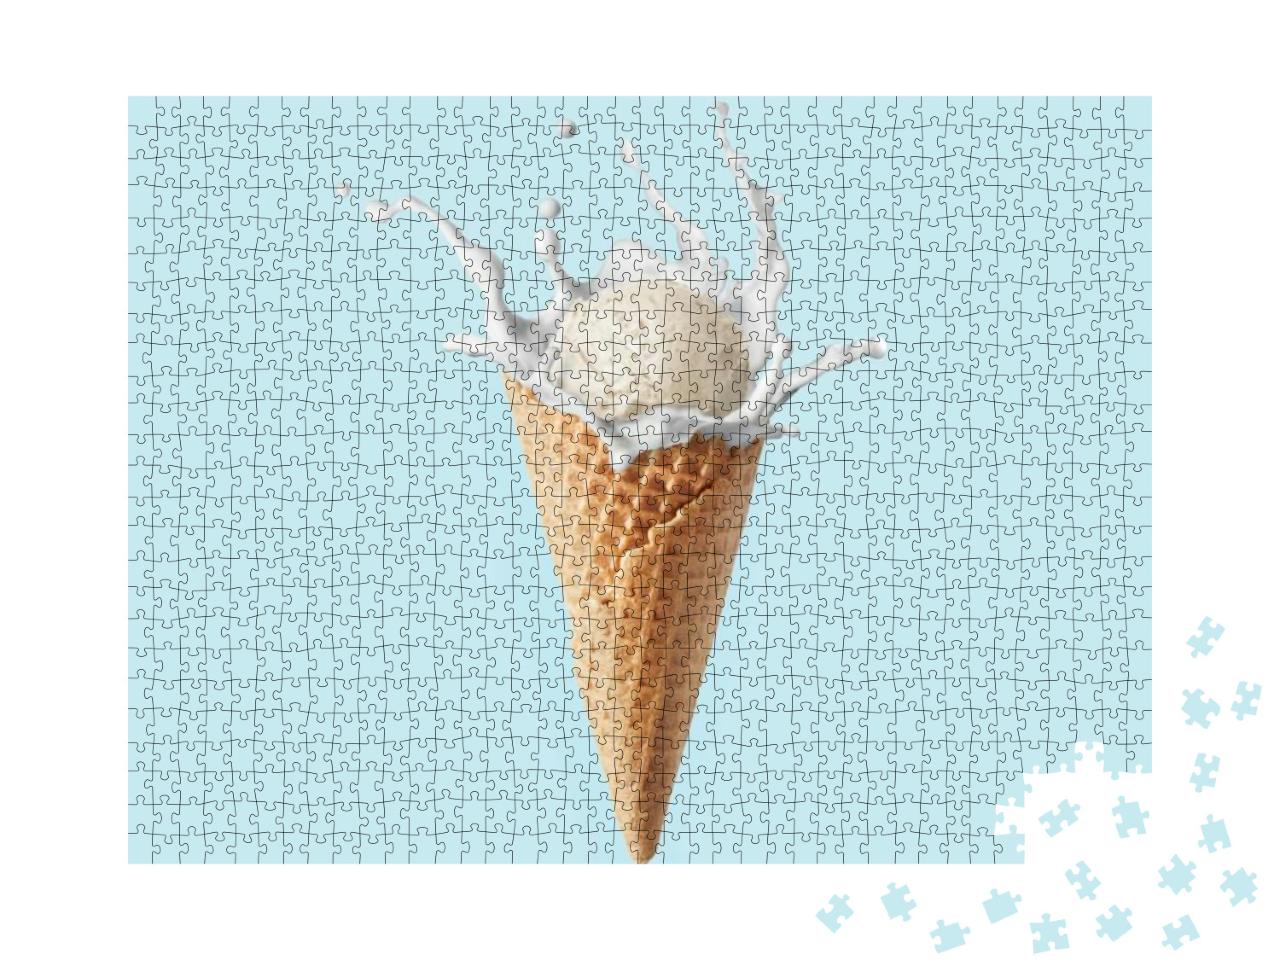 Waffle Corn of Fresh Natural Homemade Sweet Ice-Cream wit... Jigsaw Puzzle with 1000 pieces